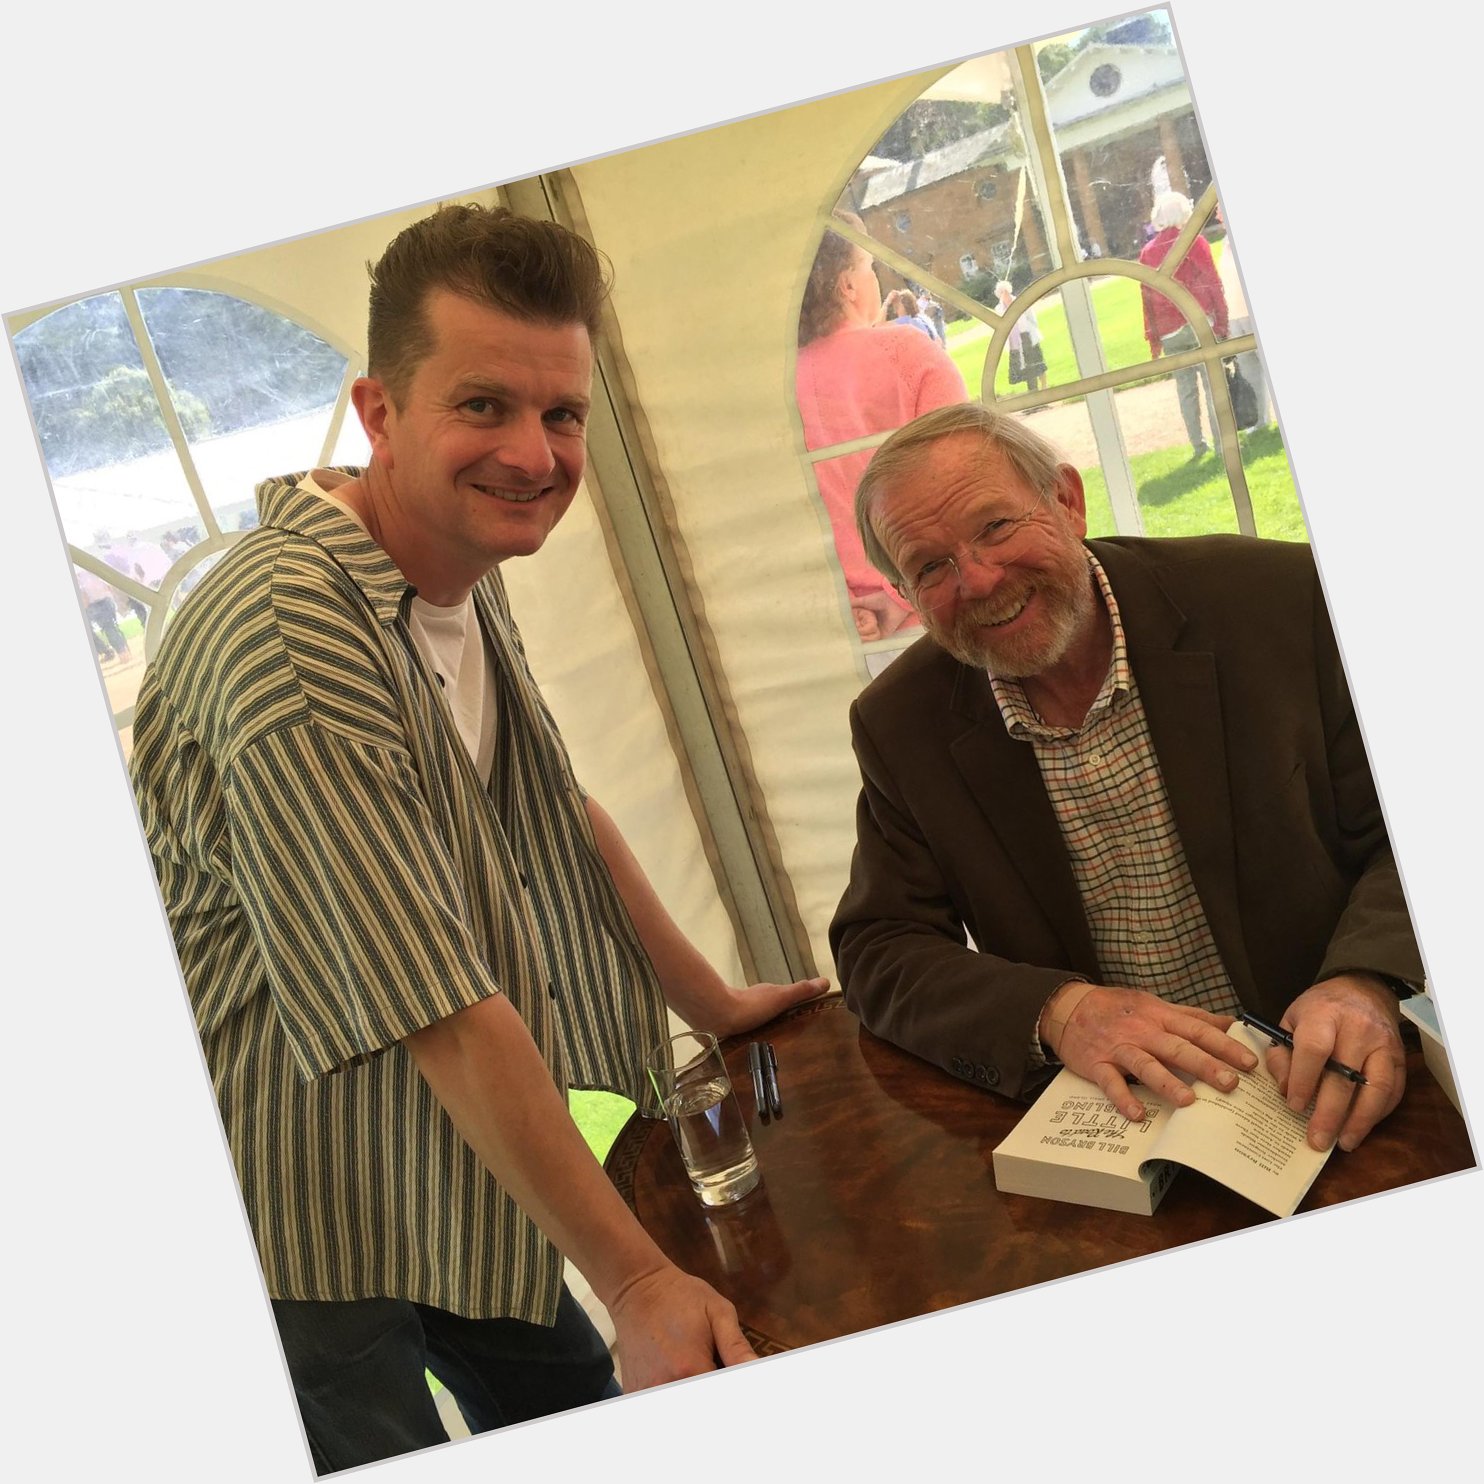 Happy birthday Bill Bryson, pictured here with my brother!! 